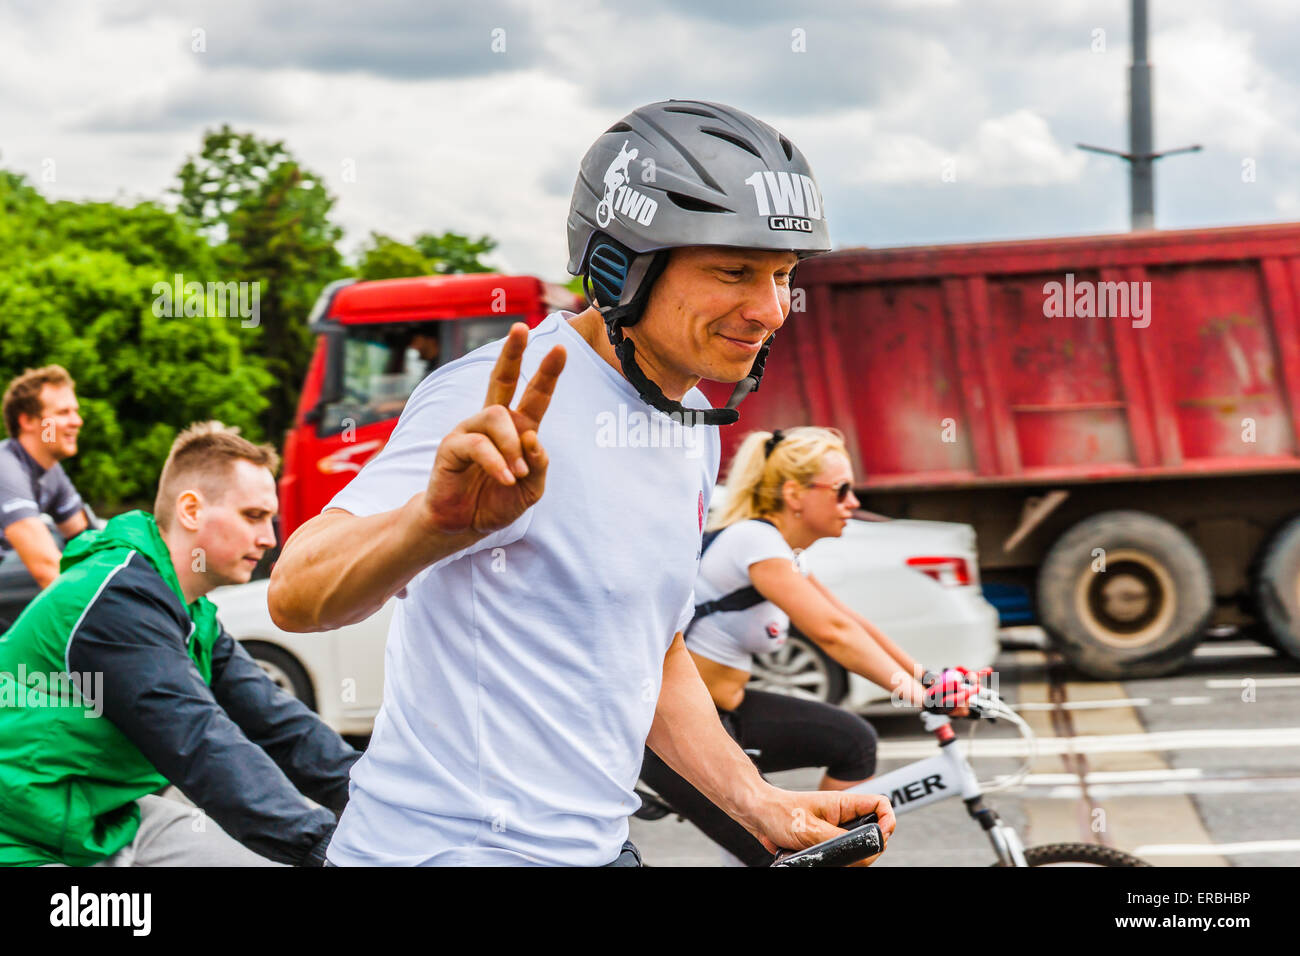 Moscow, Russia, Sunday, May 31st, 2015. 5th annual Moscow Bike Parade. The parade was organized by the Let's Bike It! project to promote the development of the bicycle infrastructure and road traffic safety in the city. Invincible. Credit:  Alex's Pictures/Alamy Live News Stock Photo